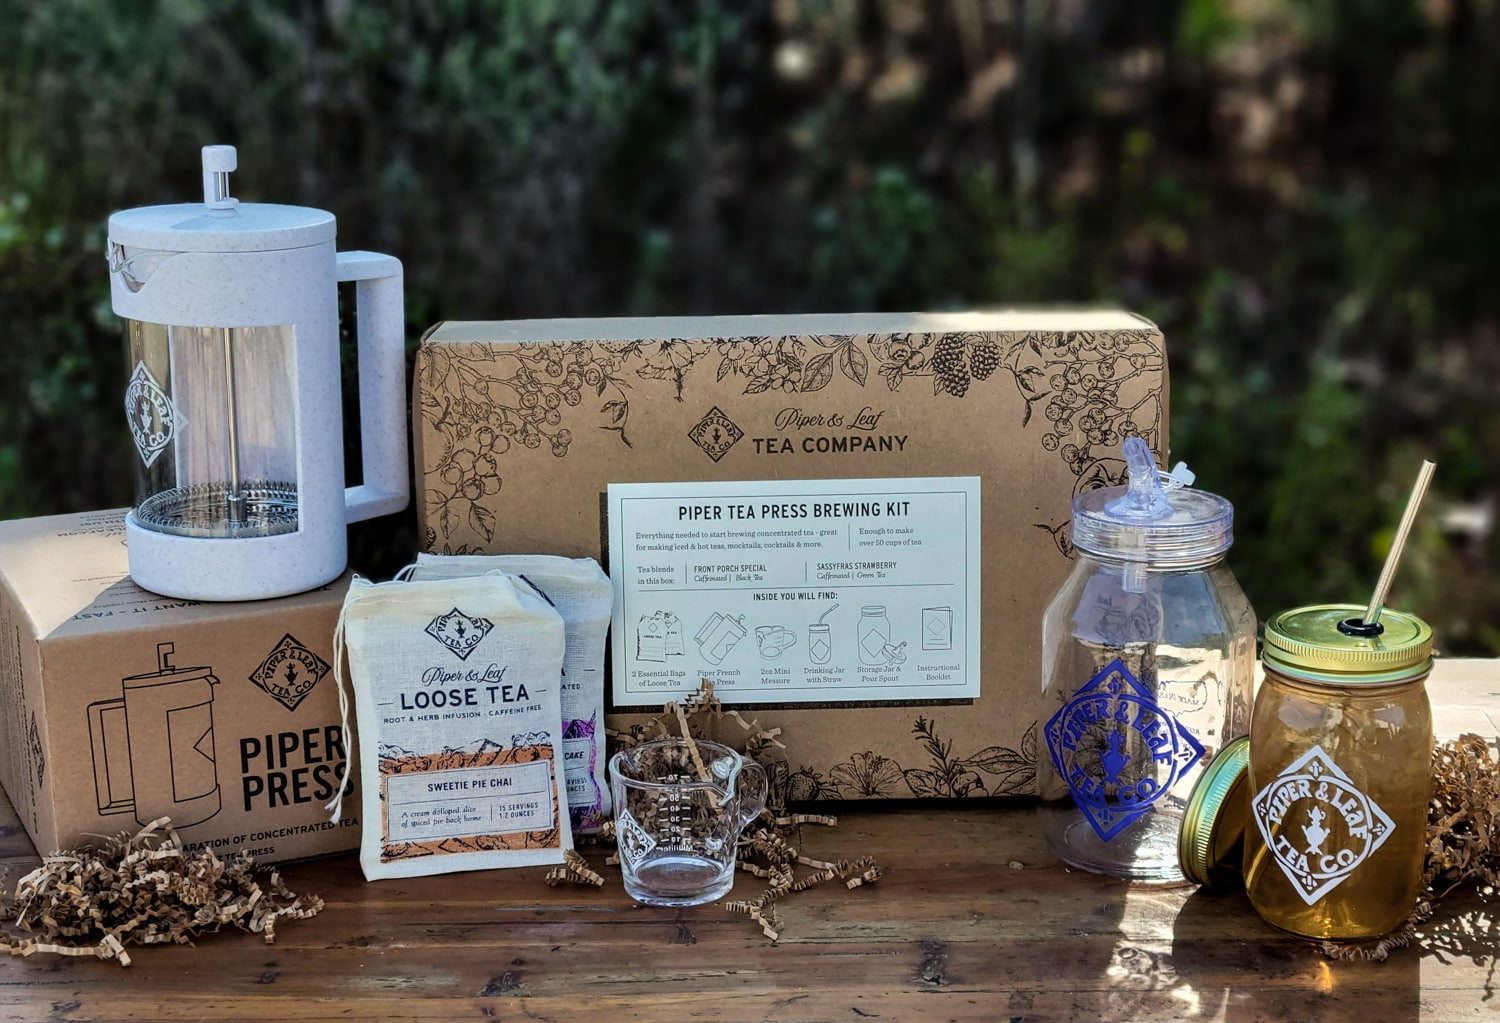 A box with a Piper Press Brew Kit, Piper & Leaf Tea Co. coffee maker, and other items on a wooden table.